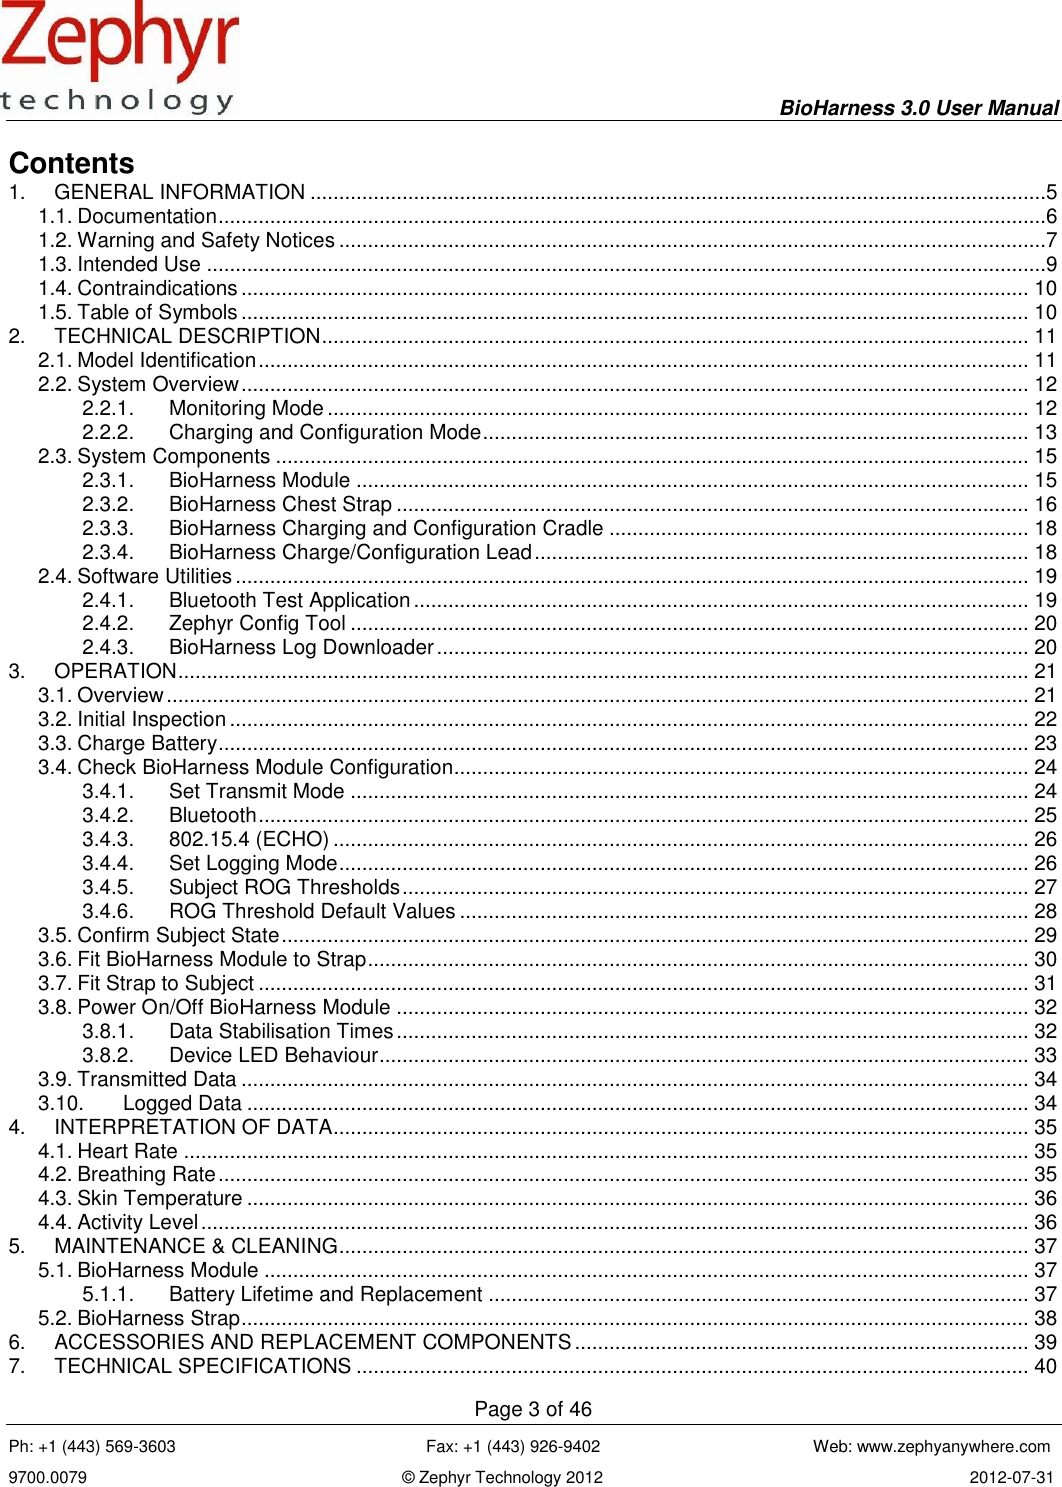     BioHarness 3.0 User Manual  Page 3 of 46 Ph: +1 (443) 569-3603                                                      Fax: +1 (443) 926-9402                                              Web: www.zephyanywhere.com 9700.0079                                                                    © Zephyr Technology 2012                                                                               2012-07-31                                                                                                                                      Contents 1.  GENERAL INFORMATION ................................................................................................................................5 1.1. Documentation ................................................................................................................................................6 1.2. Warning and Safety Notices ...........................................................................................................................7 1.3. Intended Use ..................................................................................................................................................9 1.4. Contraindications ......................................................................................................................................... 10 1.5. Table of Symbols ......................................................................................................................................... 10 2.  TECHNICAL DESCRIPTION ........................................................................................................................... 11 2.1. Model Identification ...................................................................................................................................... 11 2.2. System Overview ......................................................................................................................................... 12 2.2.1.  Monitoring Mode .......................................................................................................................... 12 2.2.2.  Charging and Configuration Mode ............................................................................................... 13 2.3. System Components ................................................................................................................................... 15 2.3.1.  BioHarness Module ..................................................................................................................... 15 2.3.2.  BioHarness Chest Strap .............................................................................................................. 16 2.3.3.  BioHarness Charging and Configuration Cradle ......................................................................... 18 2.3.4.  BioHarness Charge/Configuration Lead ...................................................................................... 18 2.4. Software Utilities .......................................................................................................................................... 19 2.4.1.  Bluetooth Test Application ........................................................................................................... 19 2.4.2.  Zephyr Config Tool ...................................................................................................................... 20 2.4.3.  BioHarness Log Downloader ....................................................................................................... 20 3.  OPERATION .................................................................................................................................................... 21 3.1. Overview ...................................................................................................................................................... 21 3.2. Initial Inspection ........................................................................................................................................... 22 3.3. Charge Battery ............................................................................................................................................. 23 3.4. Check BioHarness Module Configuration.................................................................................................... 24 3.4.1.  Set Transmit Mode ...................................................................................................................... 24 3.4.2.  Bluetooth ...................................................................................................................................... 25 3.4.3.  802.15.4 (ECHO) ......................................................................................................................... 26 3.4.4.  Set Logging Mode ........................................................................................................................ 26 3.4.5.  Subject ROG Thresholds ............................................................................................................. 27 3.4.6.  ROG Threshold Default Values ................................................................................................... 28 3.5. Confirm Subject State .................................................................................................................................. 29 3.6. Fit BioHarness Module to Strap ................................................................................................................... 30 3.7. Fit Strap to Subject ...................................................................................................................................... 31 3.8. Power On/Off BioHarness Module .............................................................................................................. 32 3.8.1.  Data Stabilisation Times .............................................................................................................. 32 3.8.2.  Device LED Behaviour ................................................................................................................. 33 3.9. Transmitted Data ......................................................................................................................................... 34 3.10.  Logged Data ........................................................................................................................................ 34 4.  INTERPRETATION OF DATA ......................................................................................................................... 35 4.1. Heart Rate ................................................................................................................................................... 35 4.2. Breathing Rate ............................................................................................................................................. 35 4.3. Skin Temperature ........................................................................................................................................ 36 4.4. Activity Level ................................................................................................................................................ 36 5.  MAINTENANCE &amp; CLEANING ........................................................................................................................ 37 5.1. BioHarness Module ..................................................................................................................................... 37 5.1.1.  Battery Lifetime and Replacement .............................................................................................. 37 5.2. BioHarness Strap ......................................................................................................................................... 38 6.  ACCESSORIES AND REPLACEMENT COMPONENTS ............................................................................... 39 7.  TECHNICAL SPECIFICATIONS ..................................................................................................................... 40 